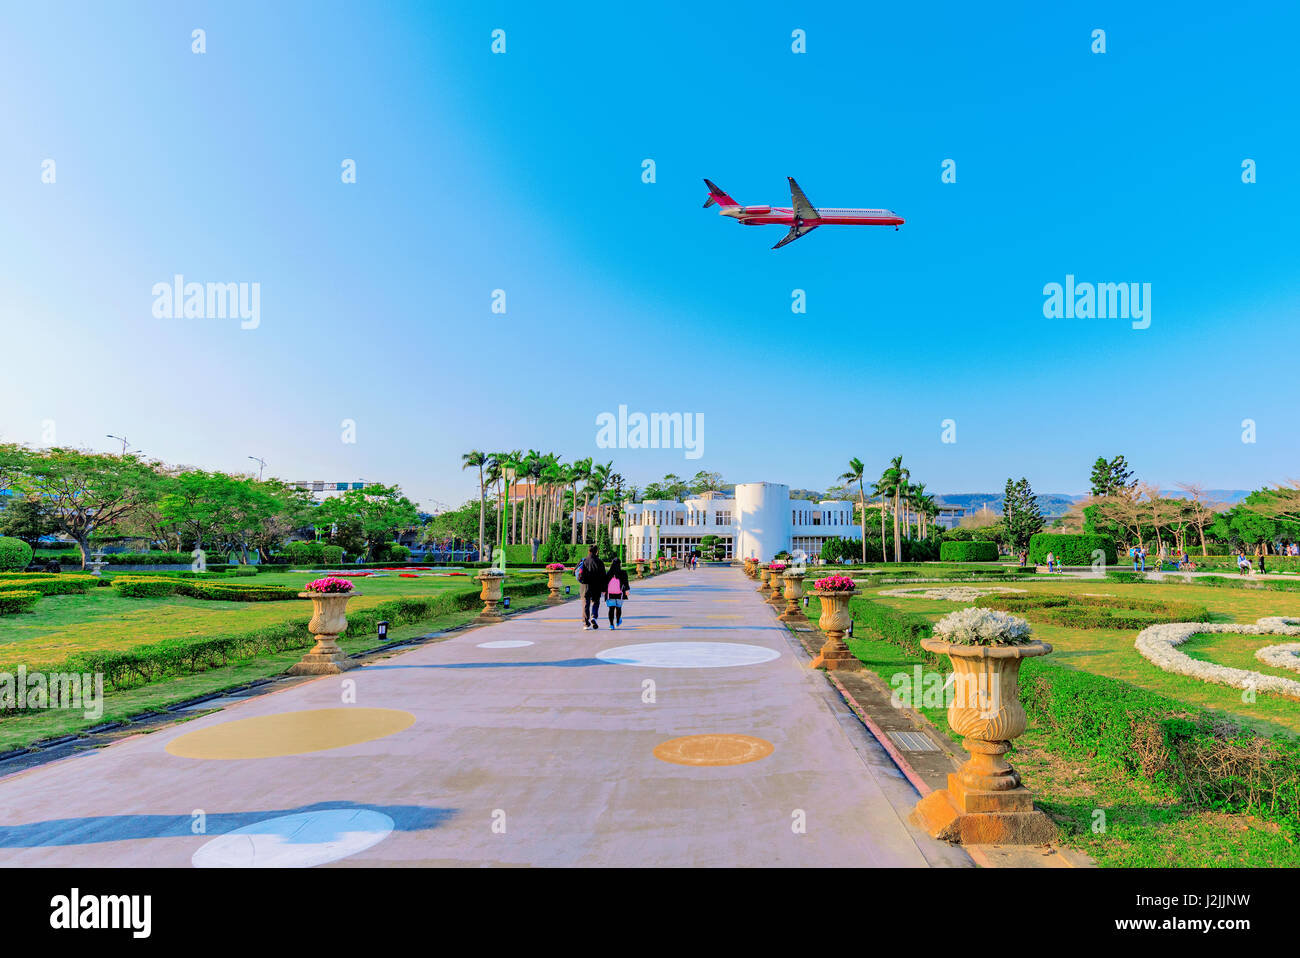 Taiwan expo park landscape with a plane flying over Stock Photo